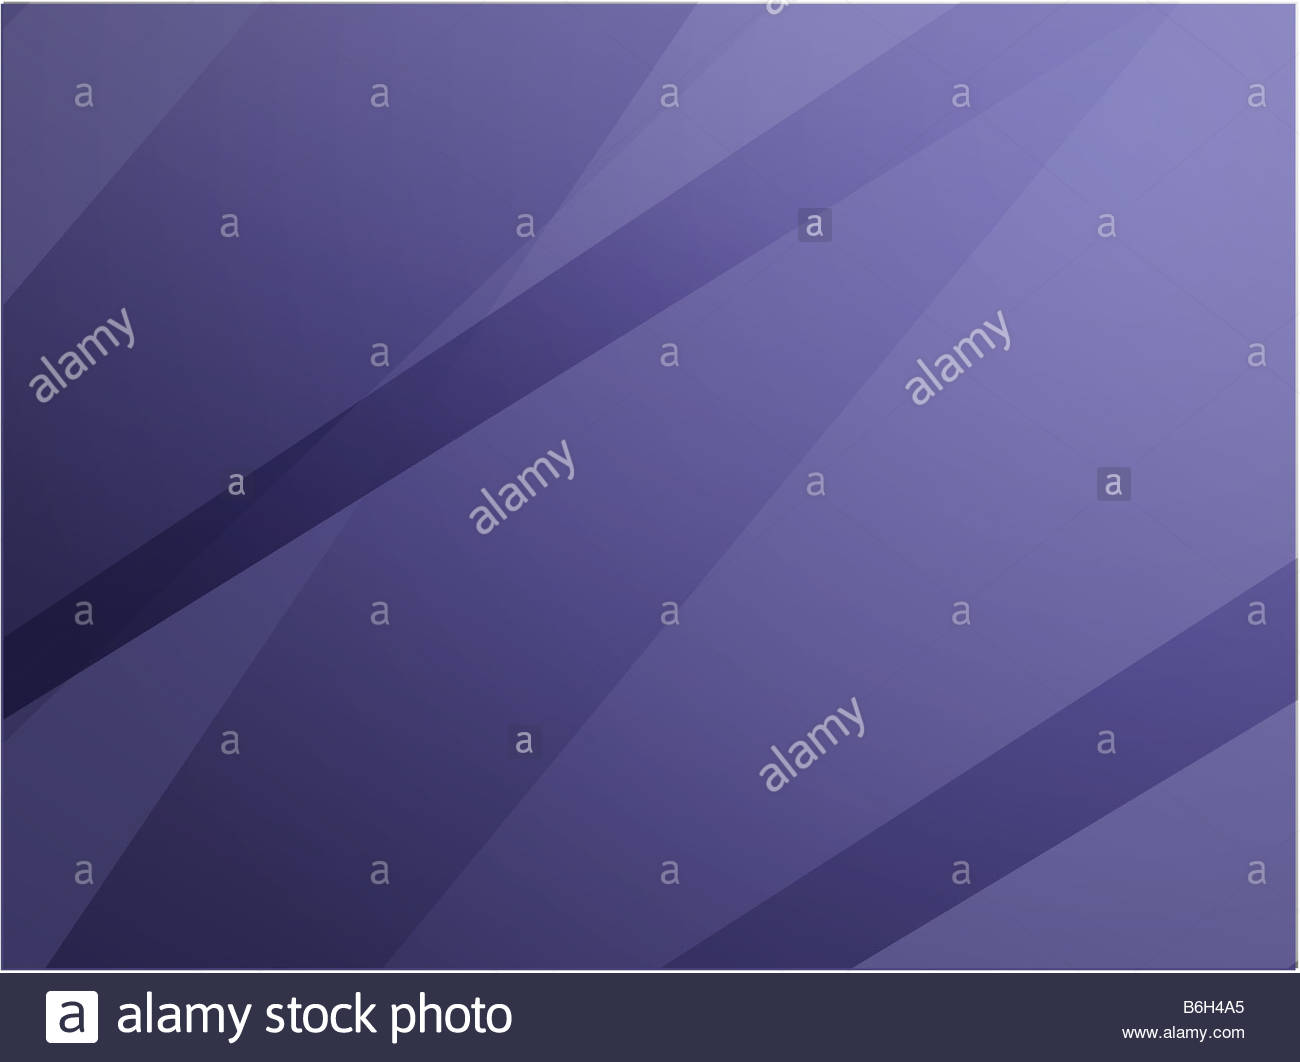 Abstract Wallpaper Design With Smooth Angular Crystalline